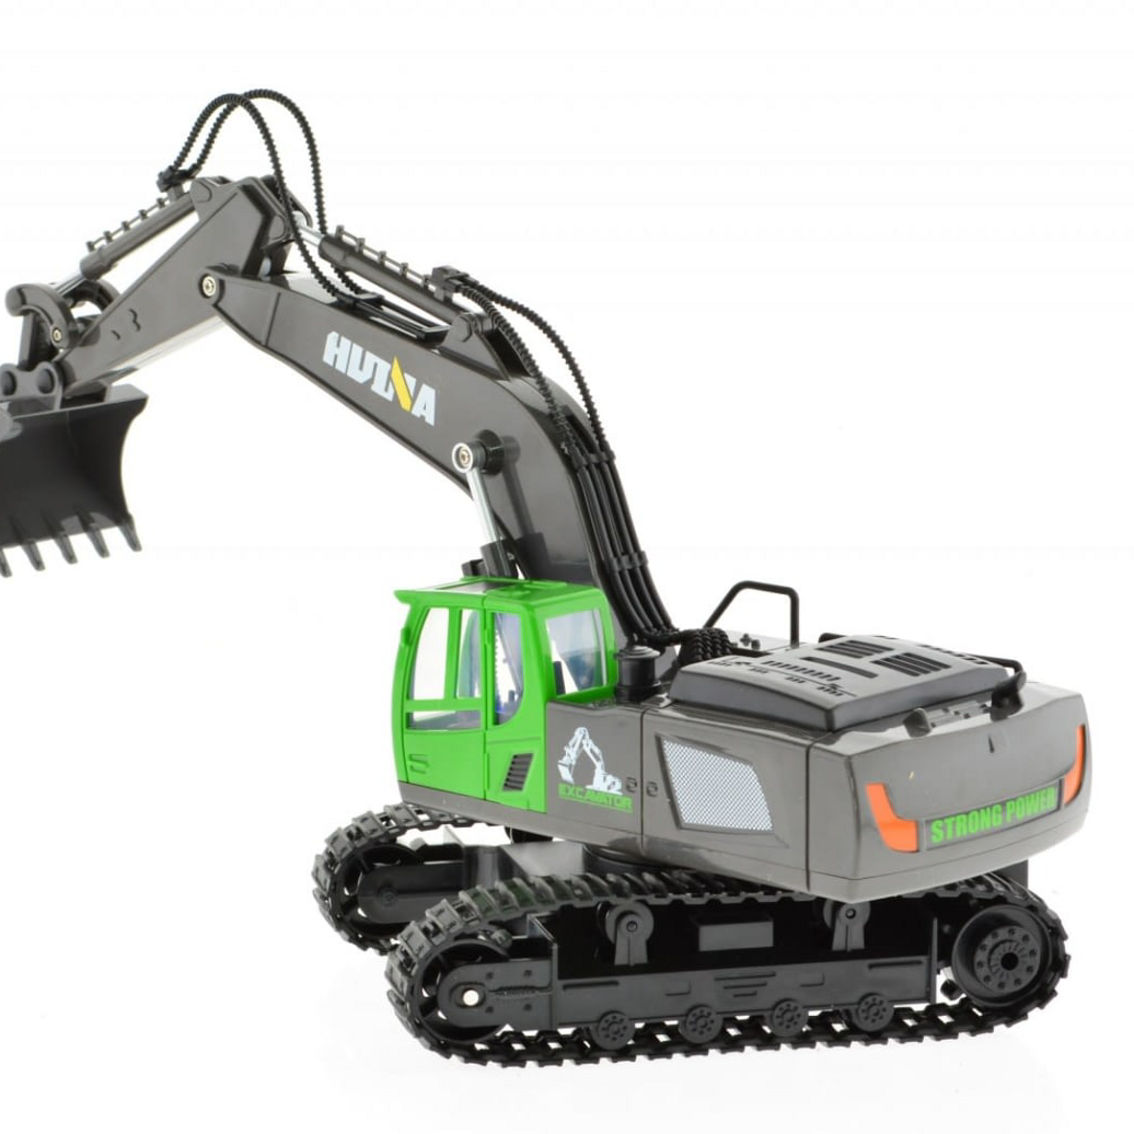 CIS-1558 1:18 scale 2.4 GHz 11 channel plastic excavator - Image 2 of 5